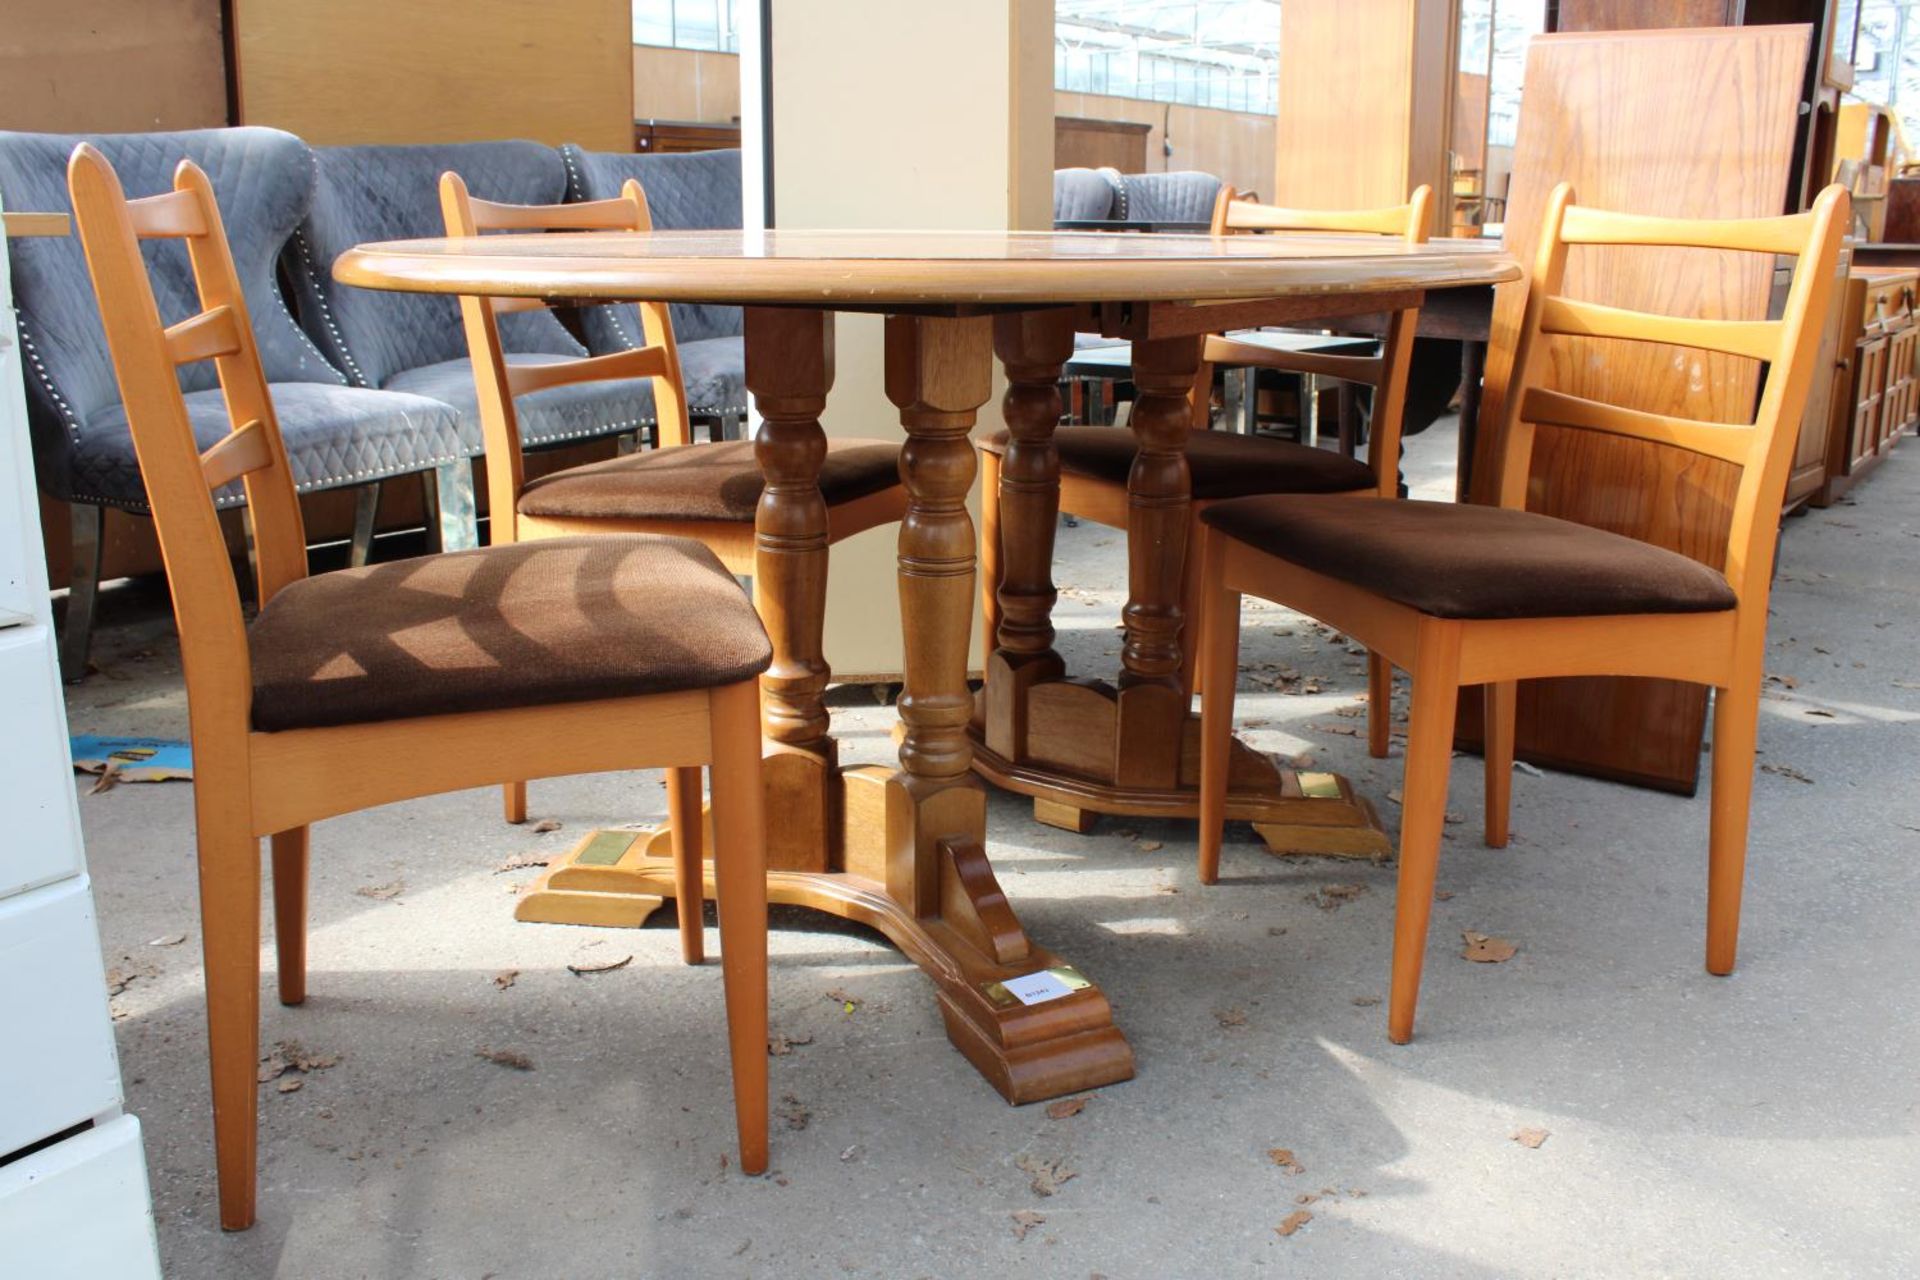 A MODERN TWIN-PEDESTAL EXTENDING DINING TABLE, 56" X 41" (LEAF 15") AND 4 SCHREIBER DINING CHAIRS - Image 3 of 4